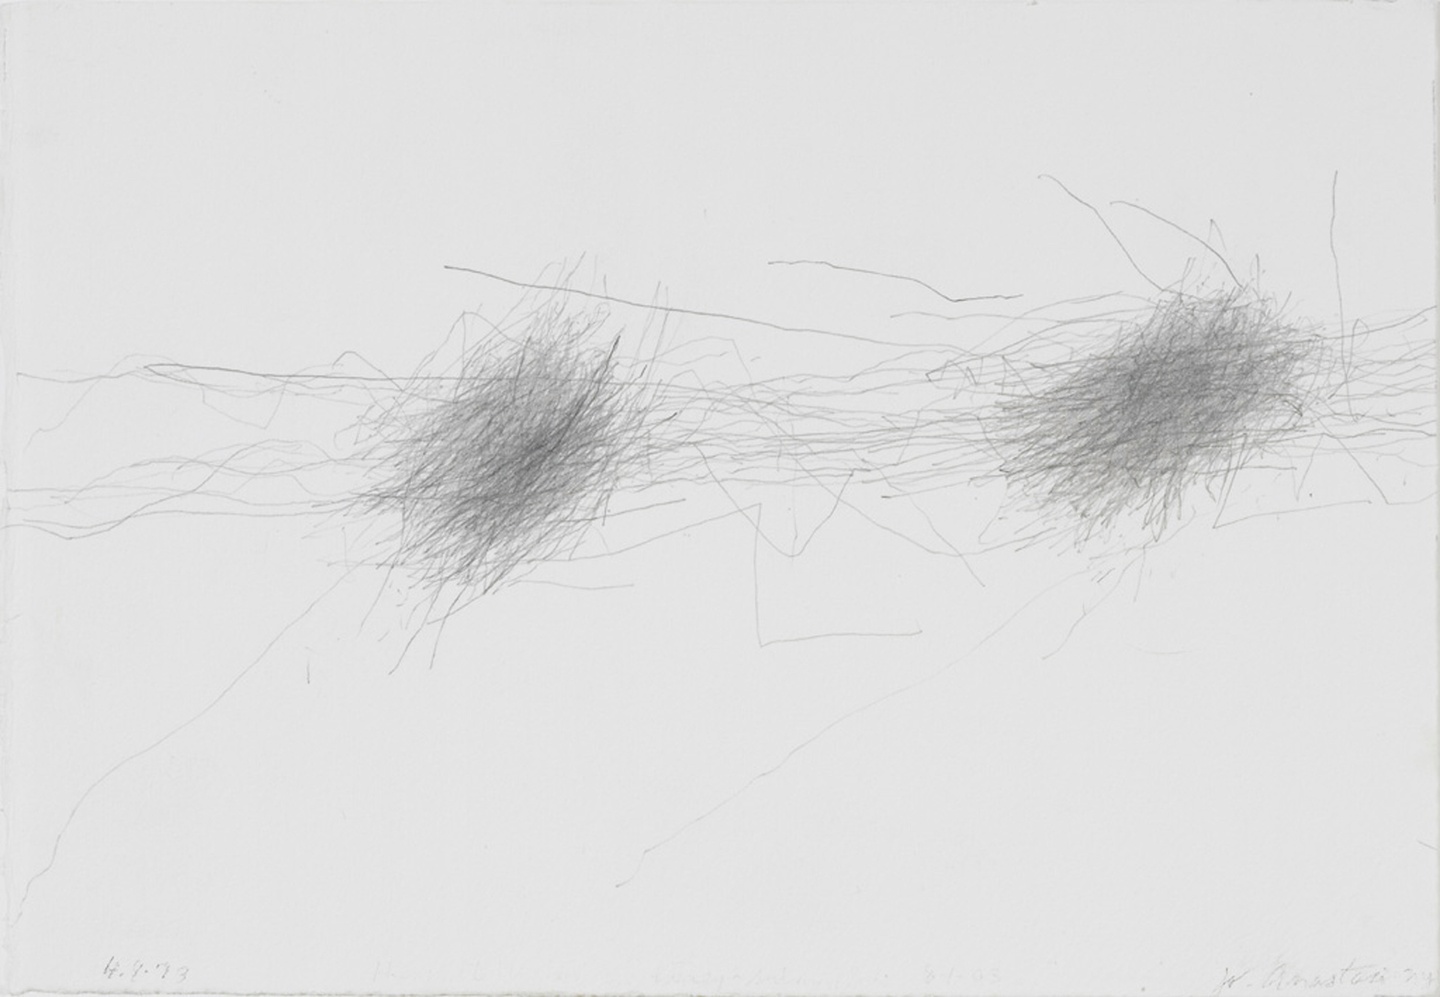 Pencil on paper drawing featuring two circular masses of many pencil strokes, with fainter, more scattered lines emanating from them.